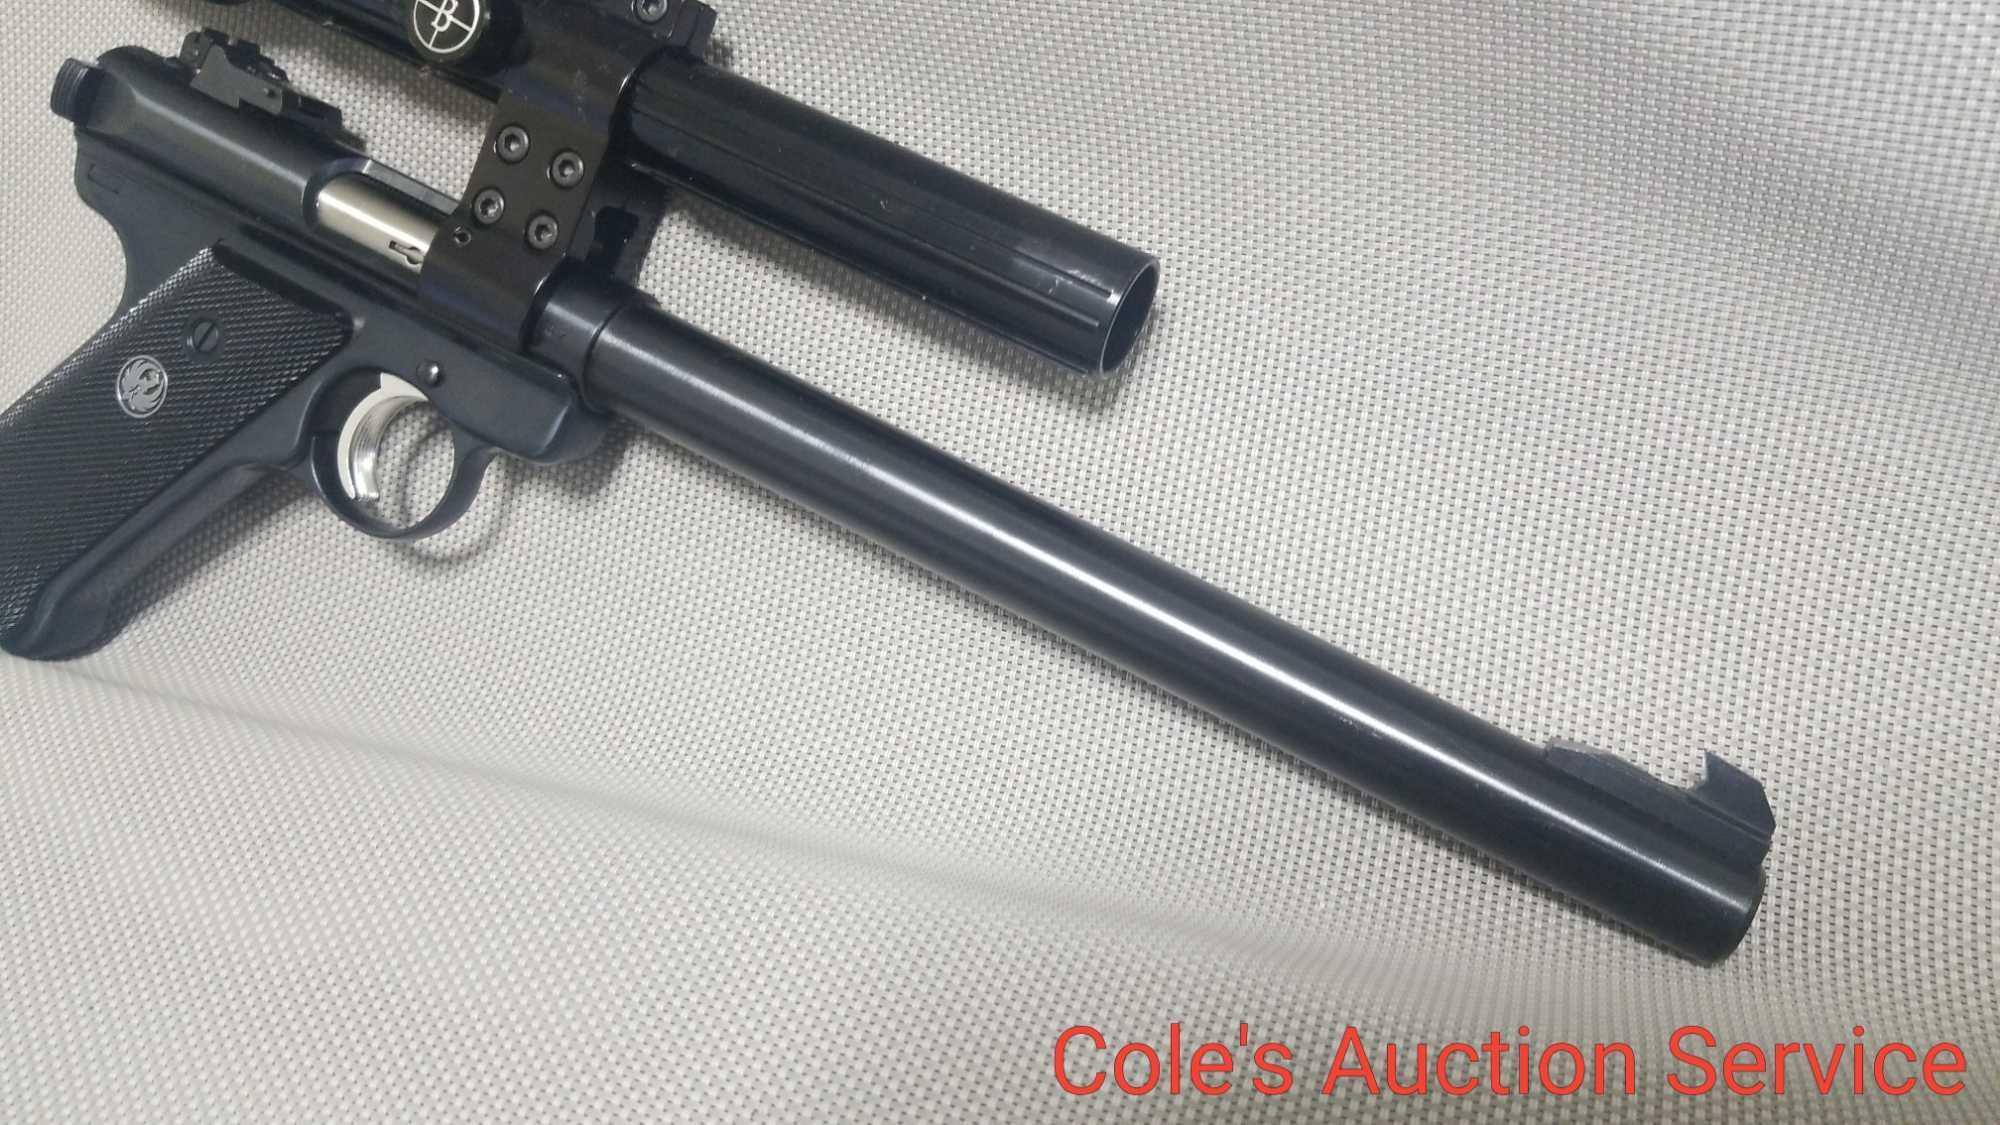 Ruger Mark 2 22 caliber target pistol with scope. Looks to be in great condition. Serial number - -